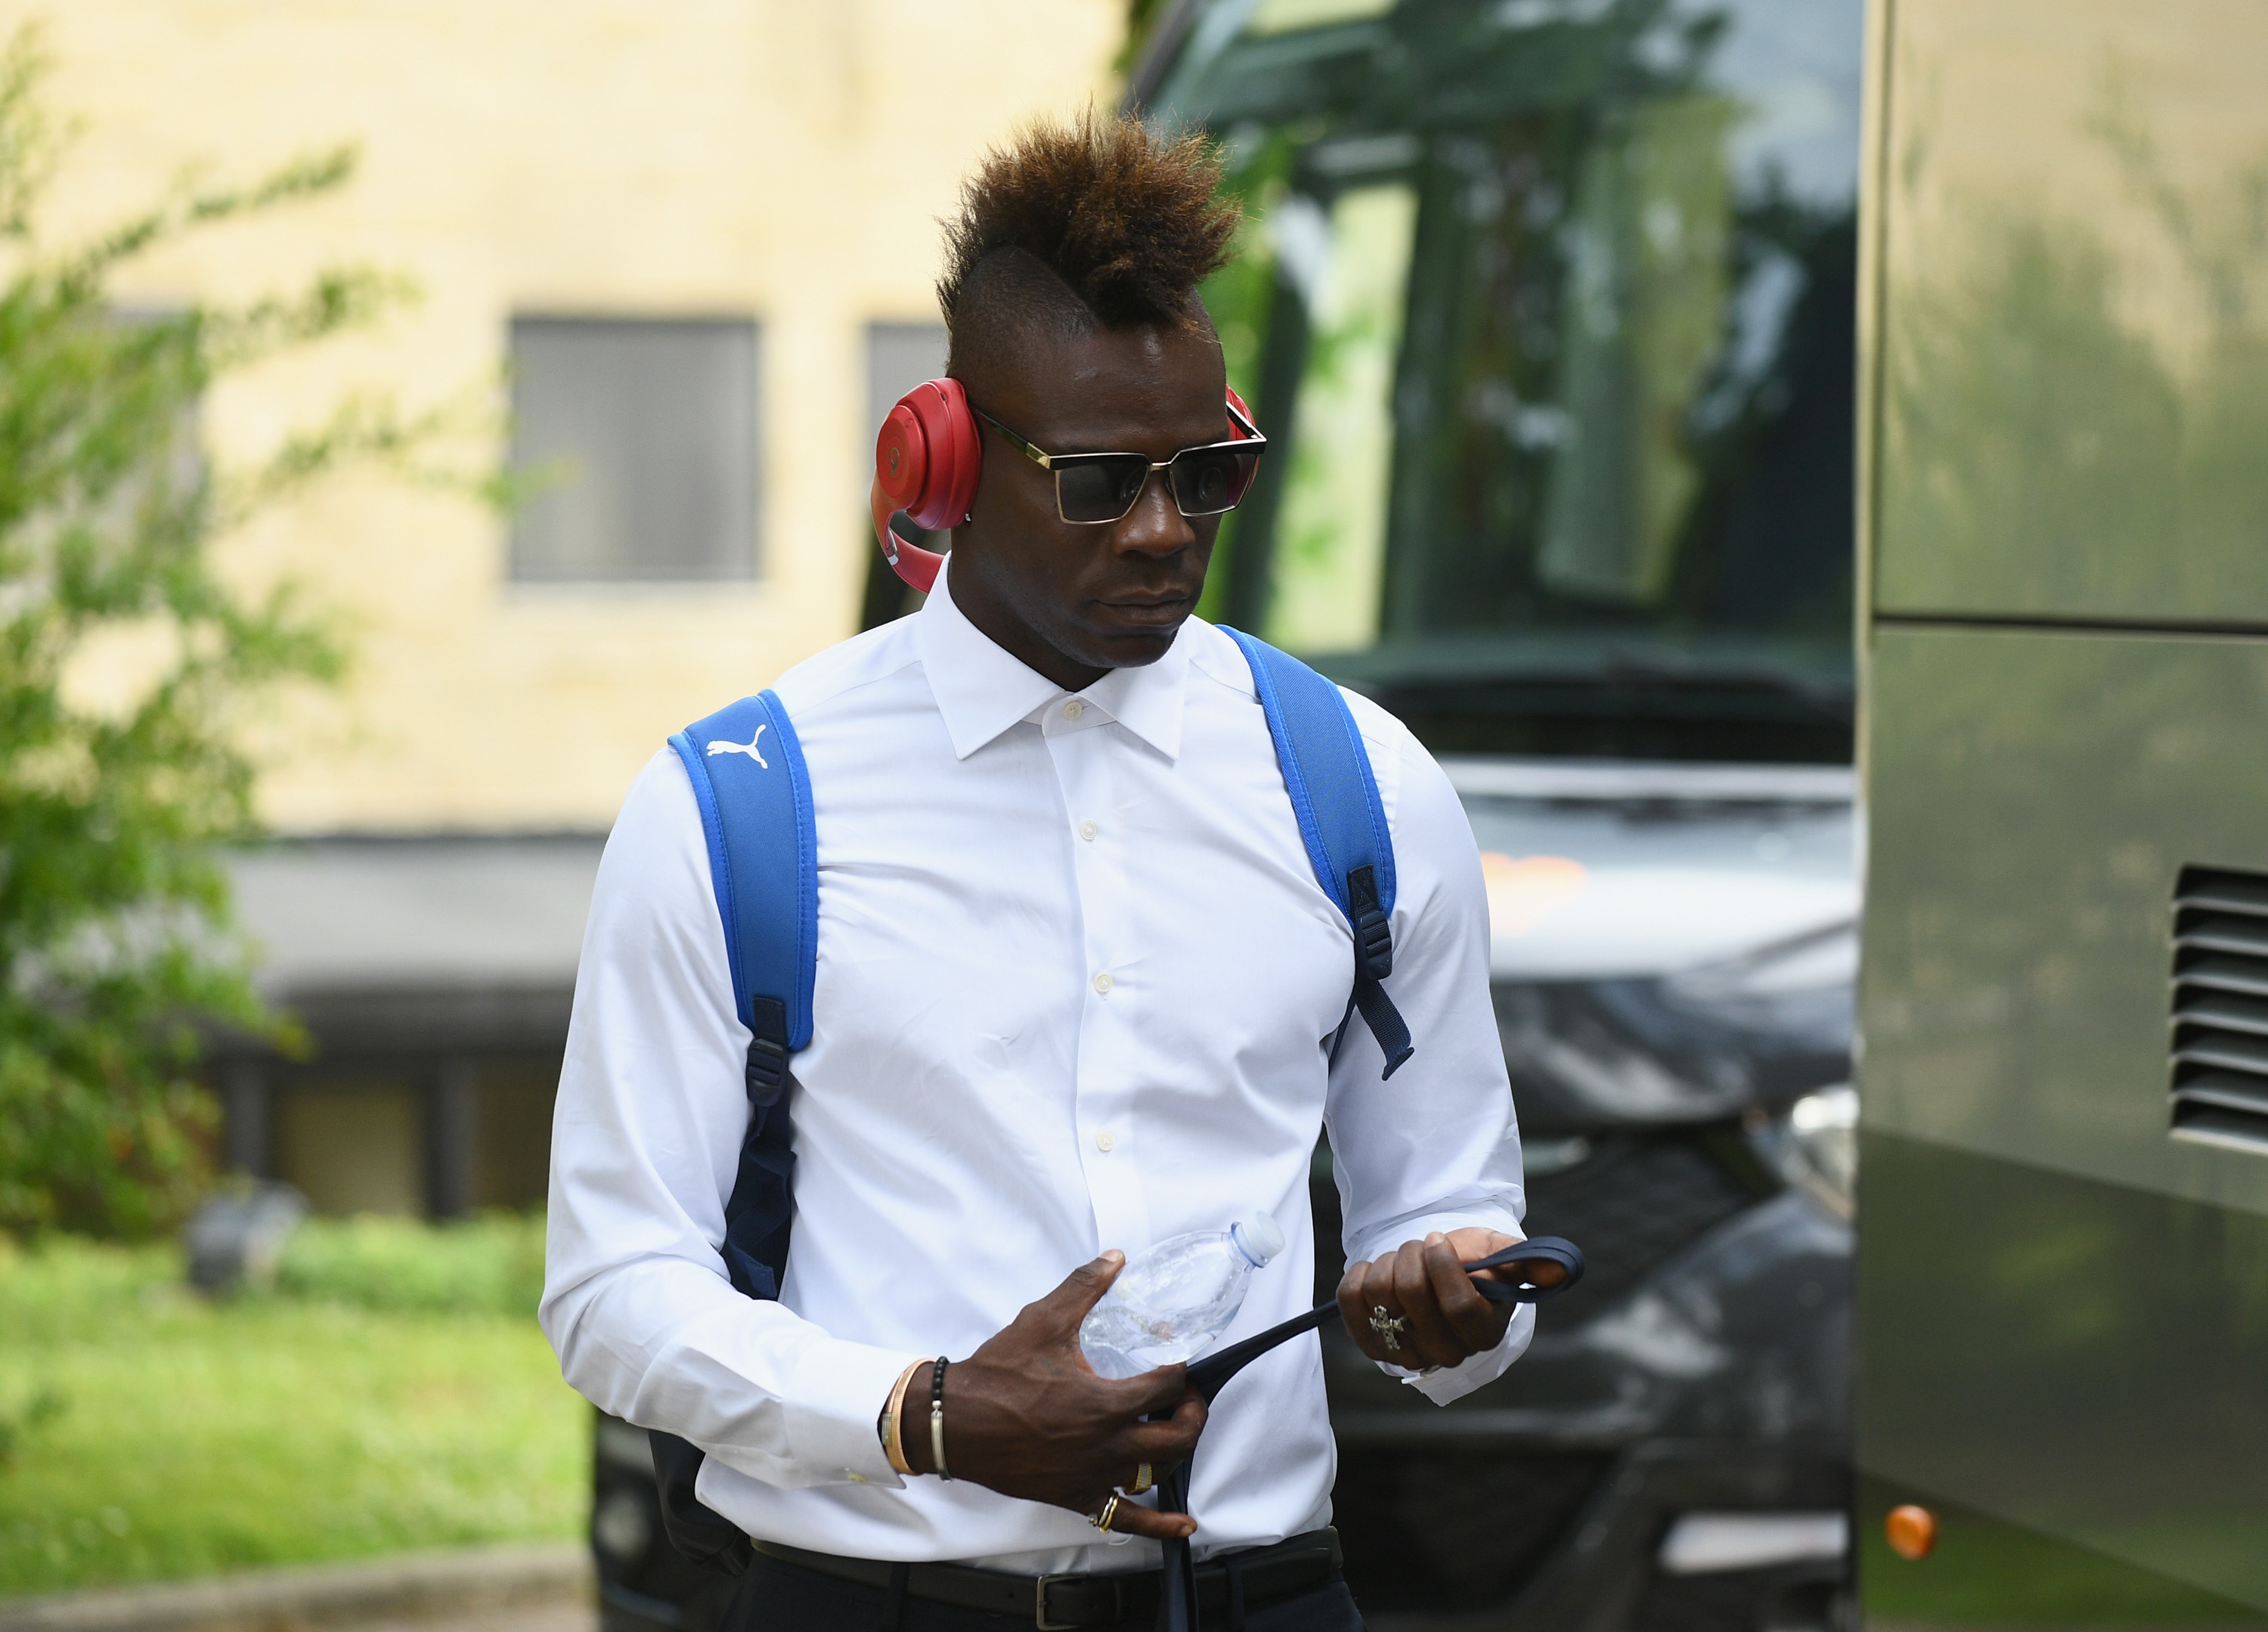 FLORENCE, ITALY - MAY 27:  Mario Balotelli of Italy departs to San Gallo on May 27, 2018 in Florence, Italy.  (Photo by Claudio Villa/Getty Images)